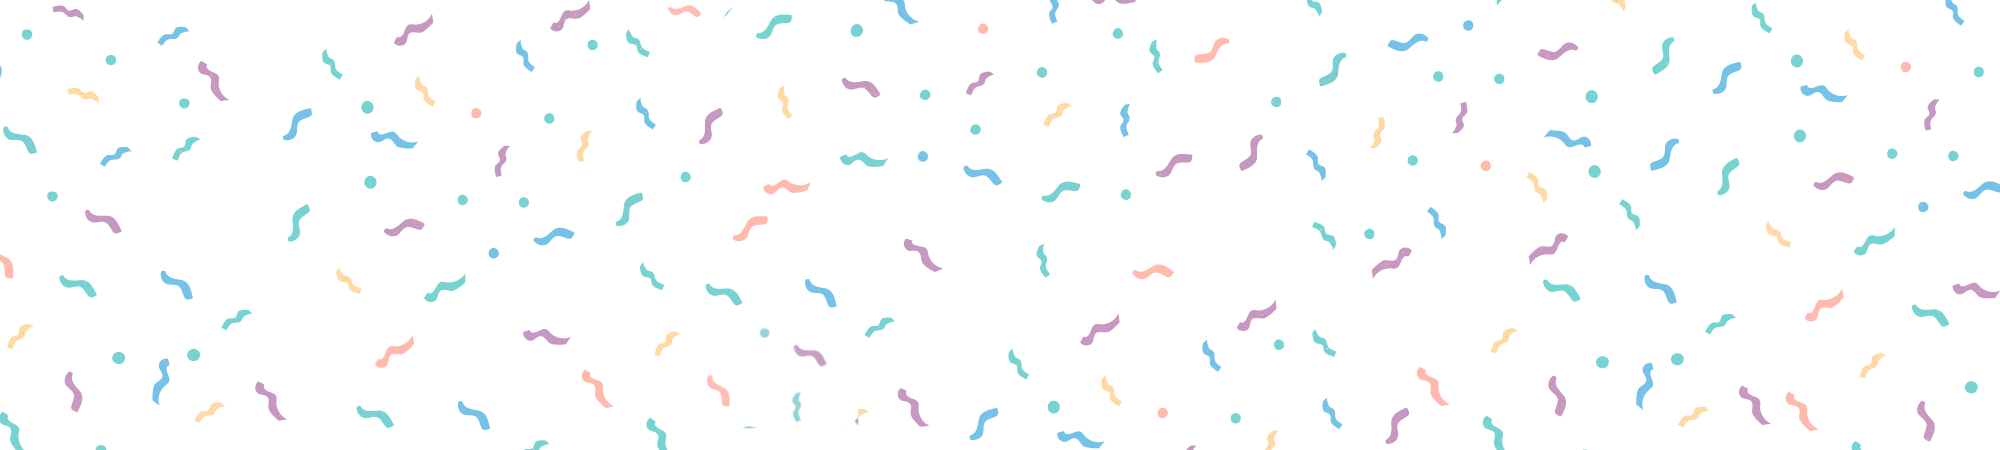 Image reads: FAQs on a confetti background